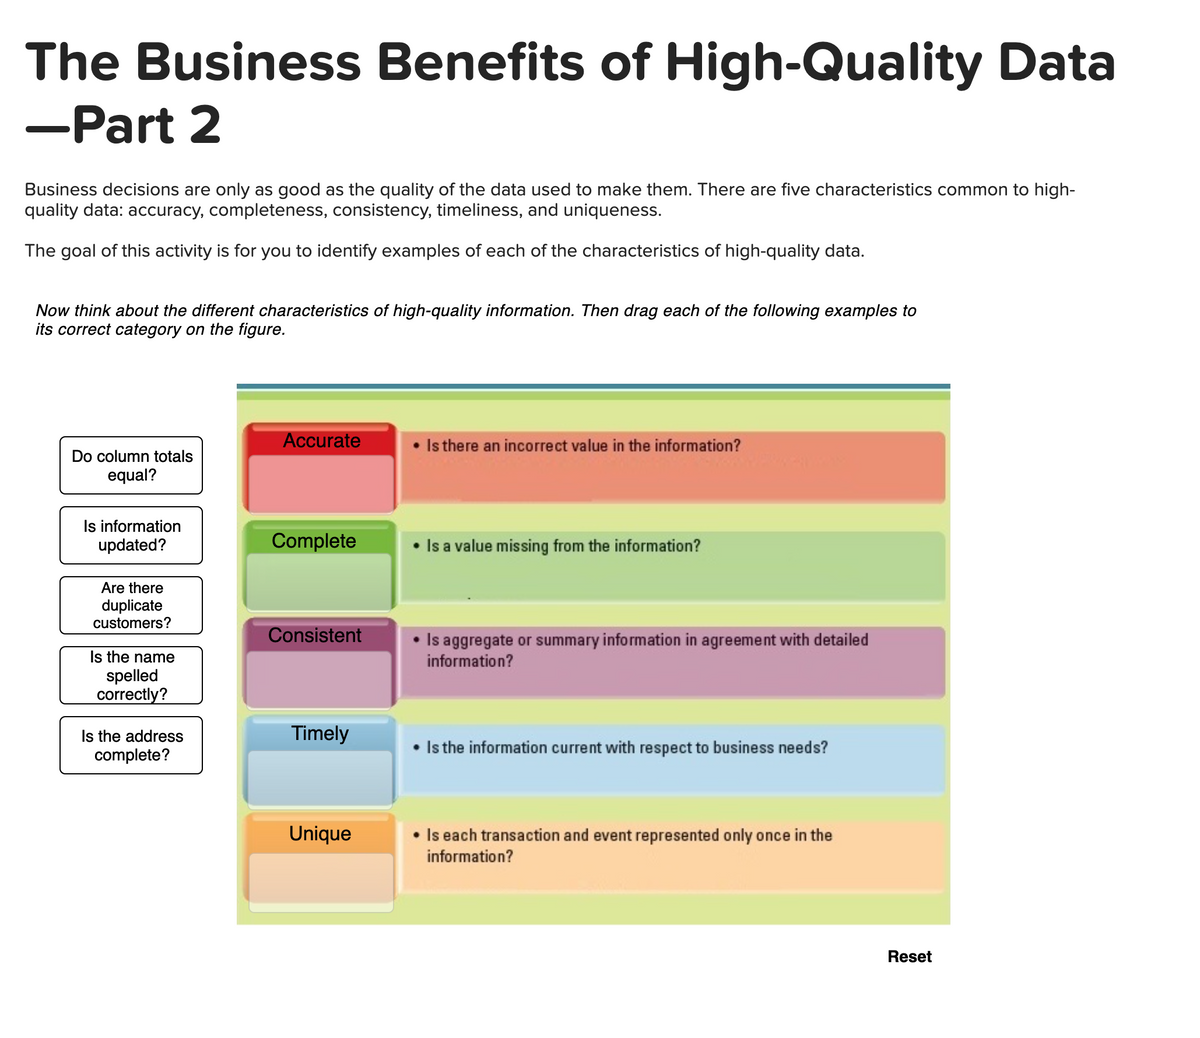 The Business Benefits of High-Quality Data
-Part 2
Business decisions are only as good as the quality of the data used to make them. There are five characteristics common to high-
quality data: accuracy, completeness, consistency, timeliness, and uniqueness.
The goal of this activity is for you to identify examples of each of the characteristics of high-quality data.
Now think about the different characteristics of high-quality information. Then drag each of the following examples to
its correct category on the figure.
Accurate
• Is there an incorrect value in the information?
Do column totals
equal?
Is information
updated?
Complete
Is a value missing from the information?
Are there
duplicate
customers?
Consistent
• Is aggregate or summary information in agreement with detailed
information?
Is the name
spelled
correctly?
Timely
Is the address
complete?
Is the information current with respect to business needs?
Unique
• Is each transaction and event represented only once in the
information?
Reset
